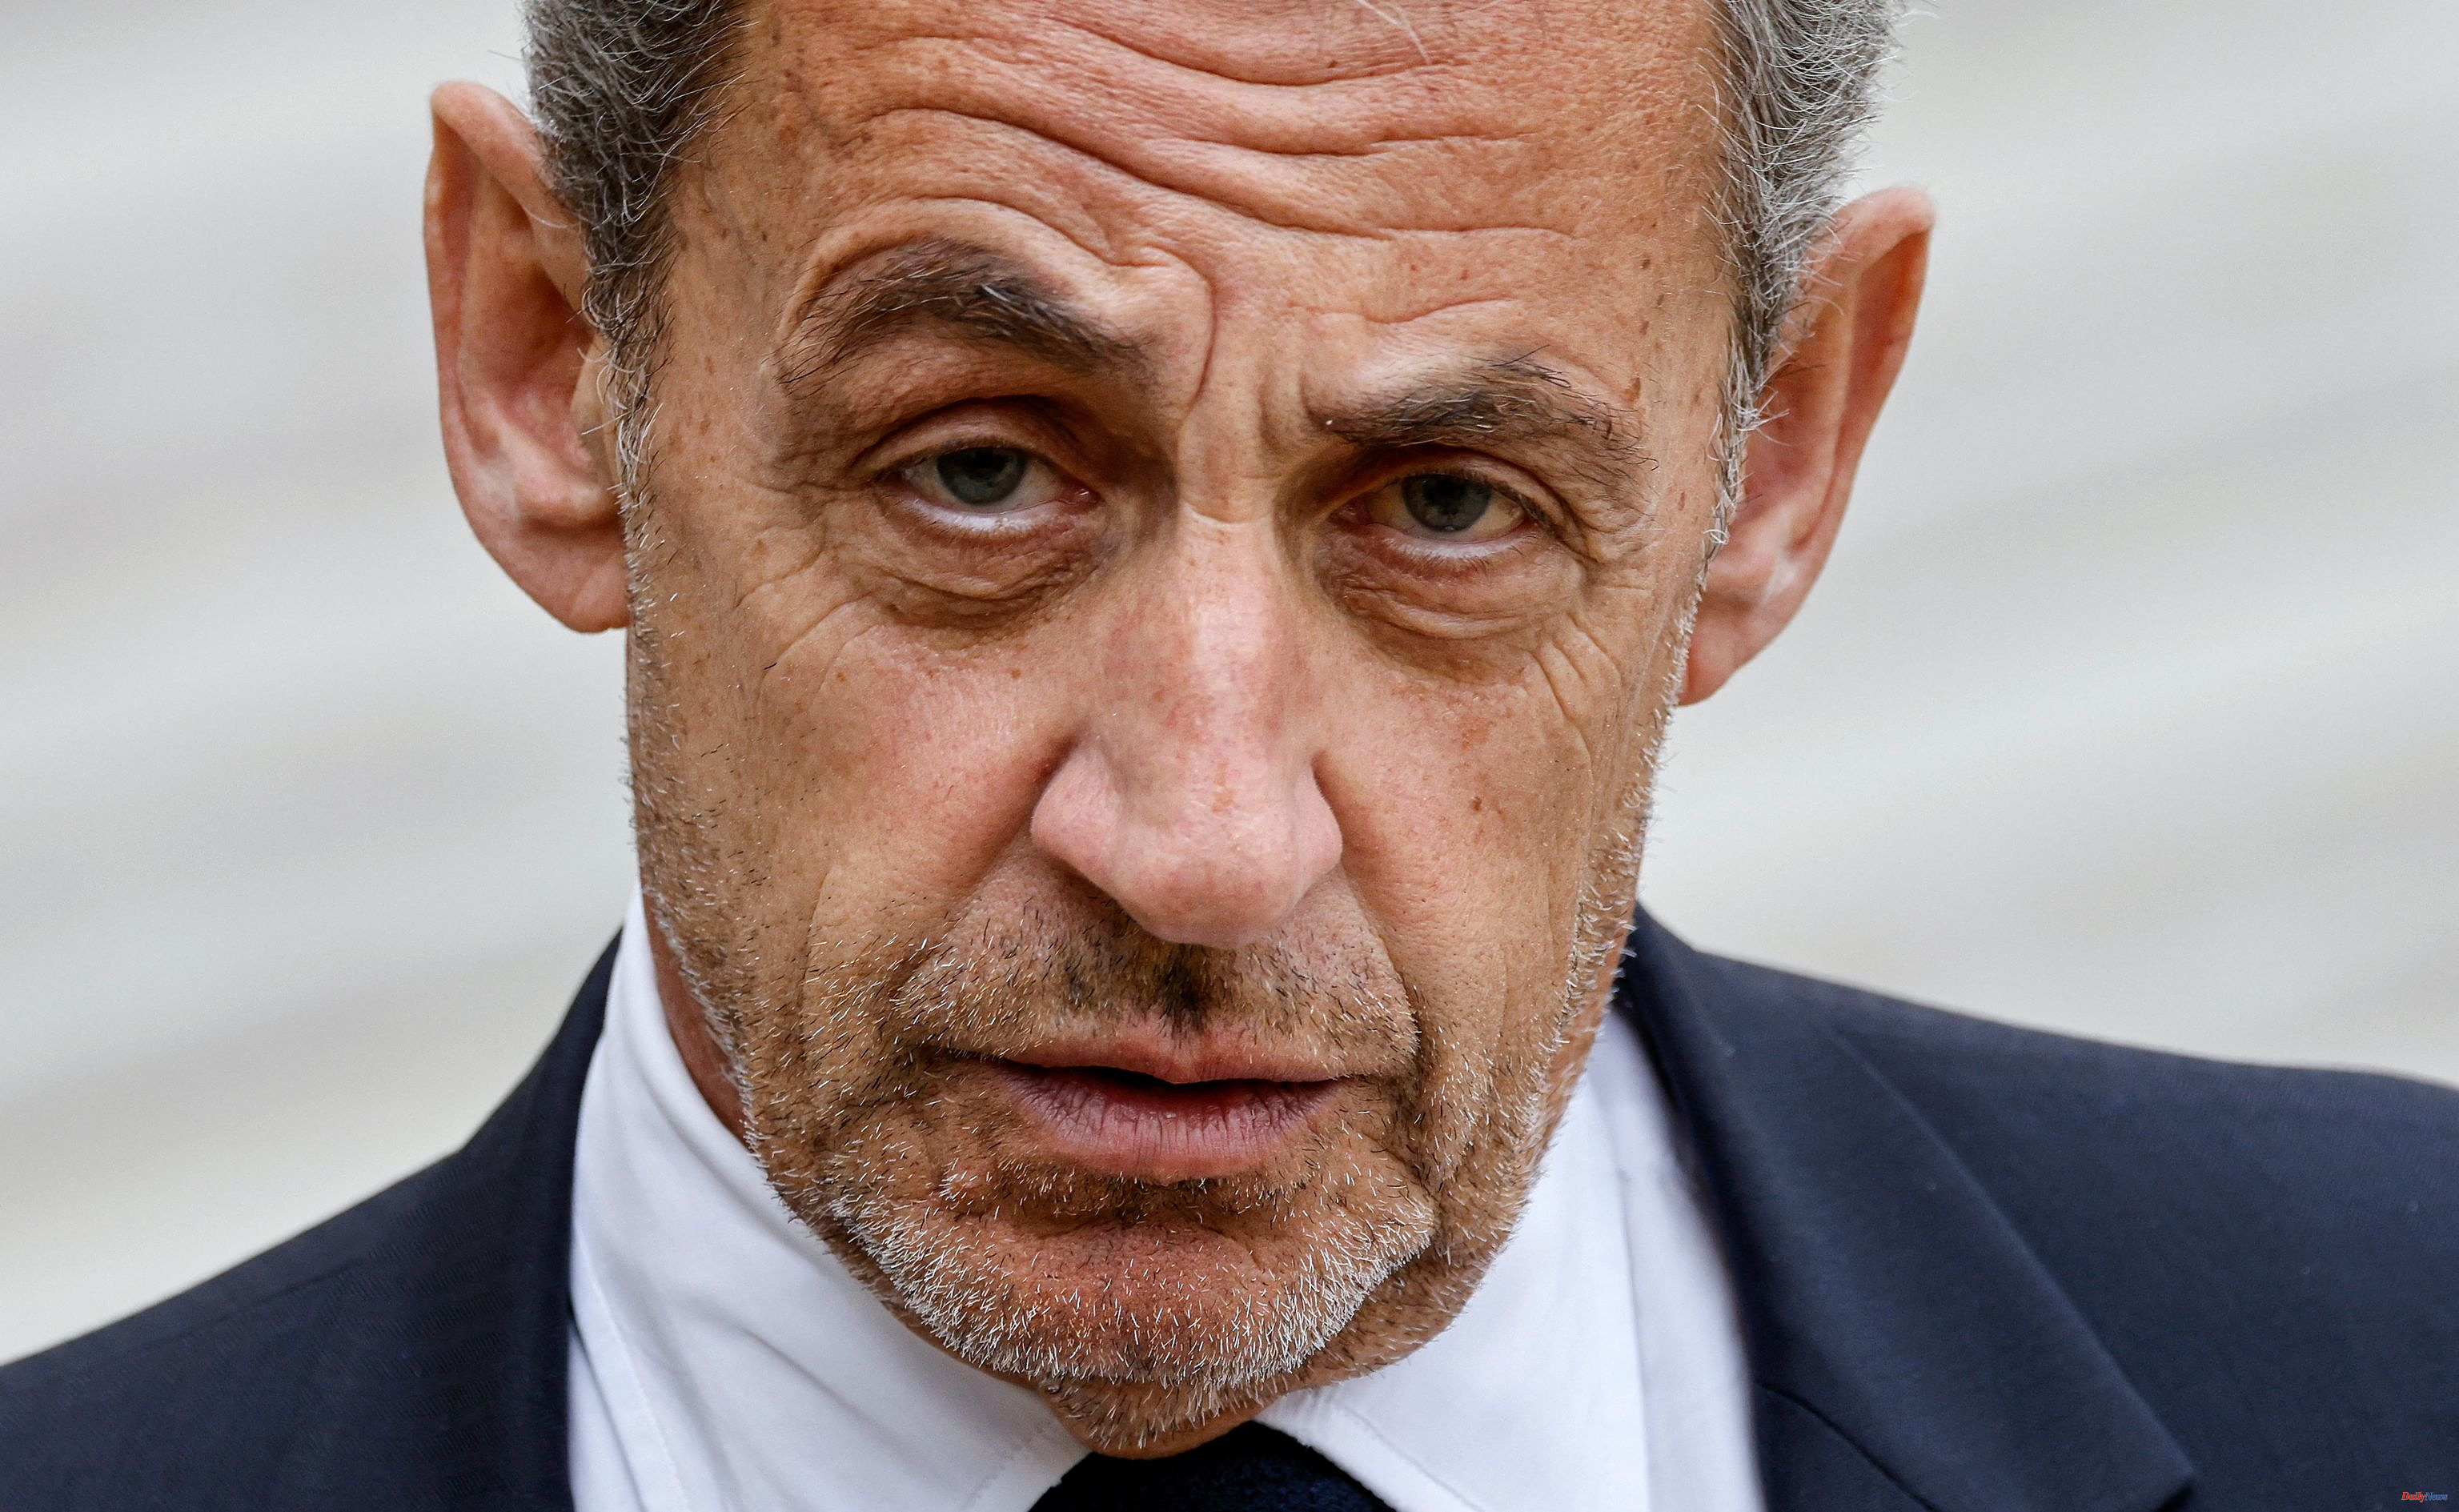 France Nicolas Sarkozy, charged in the case of illegal financing of his campaign